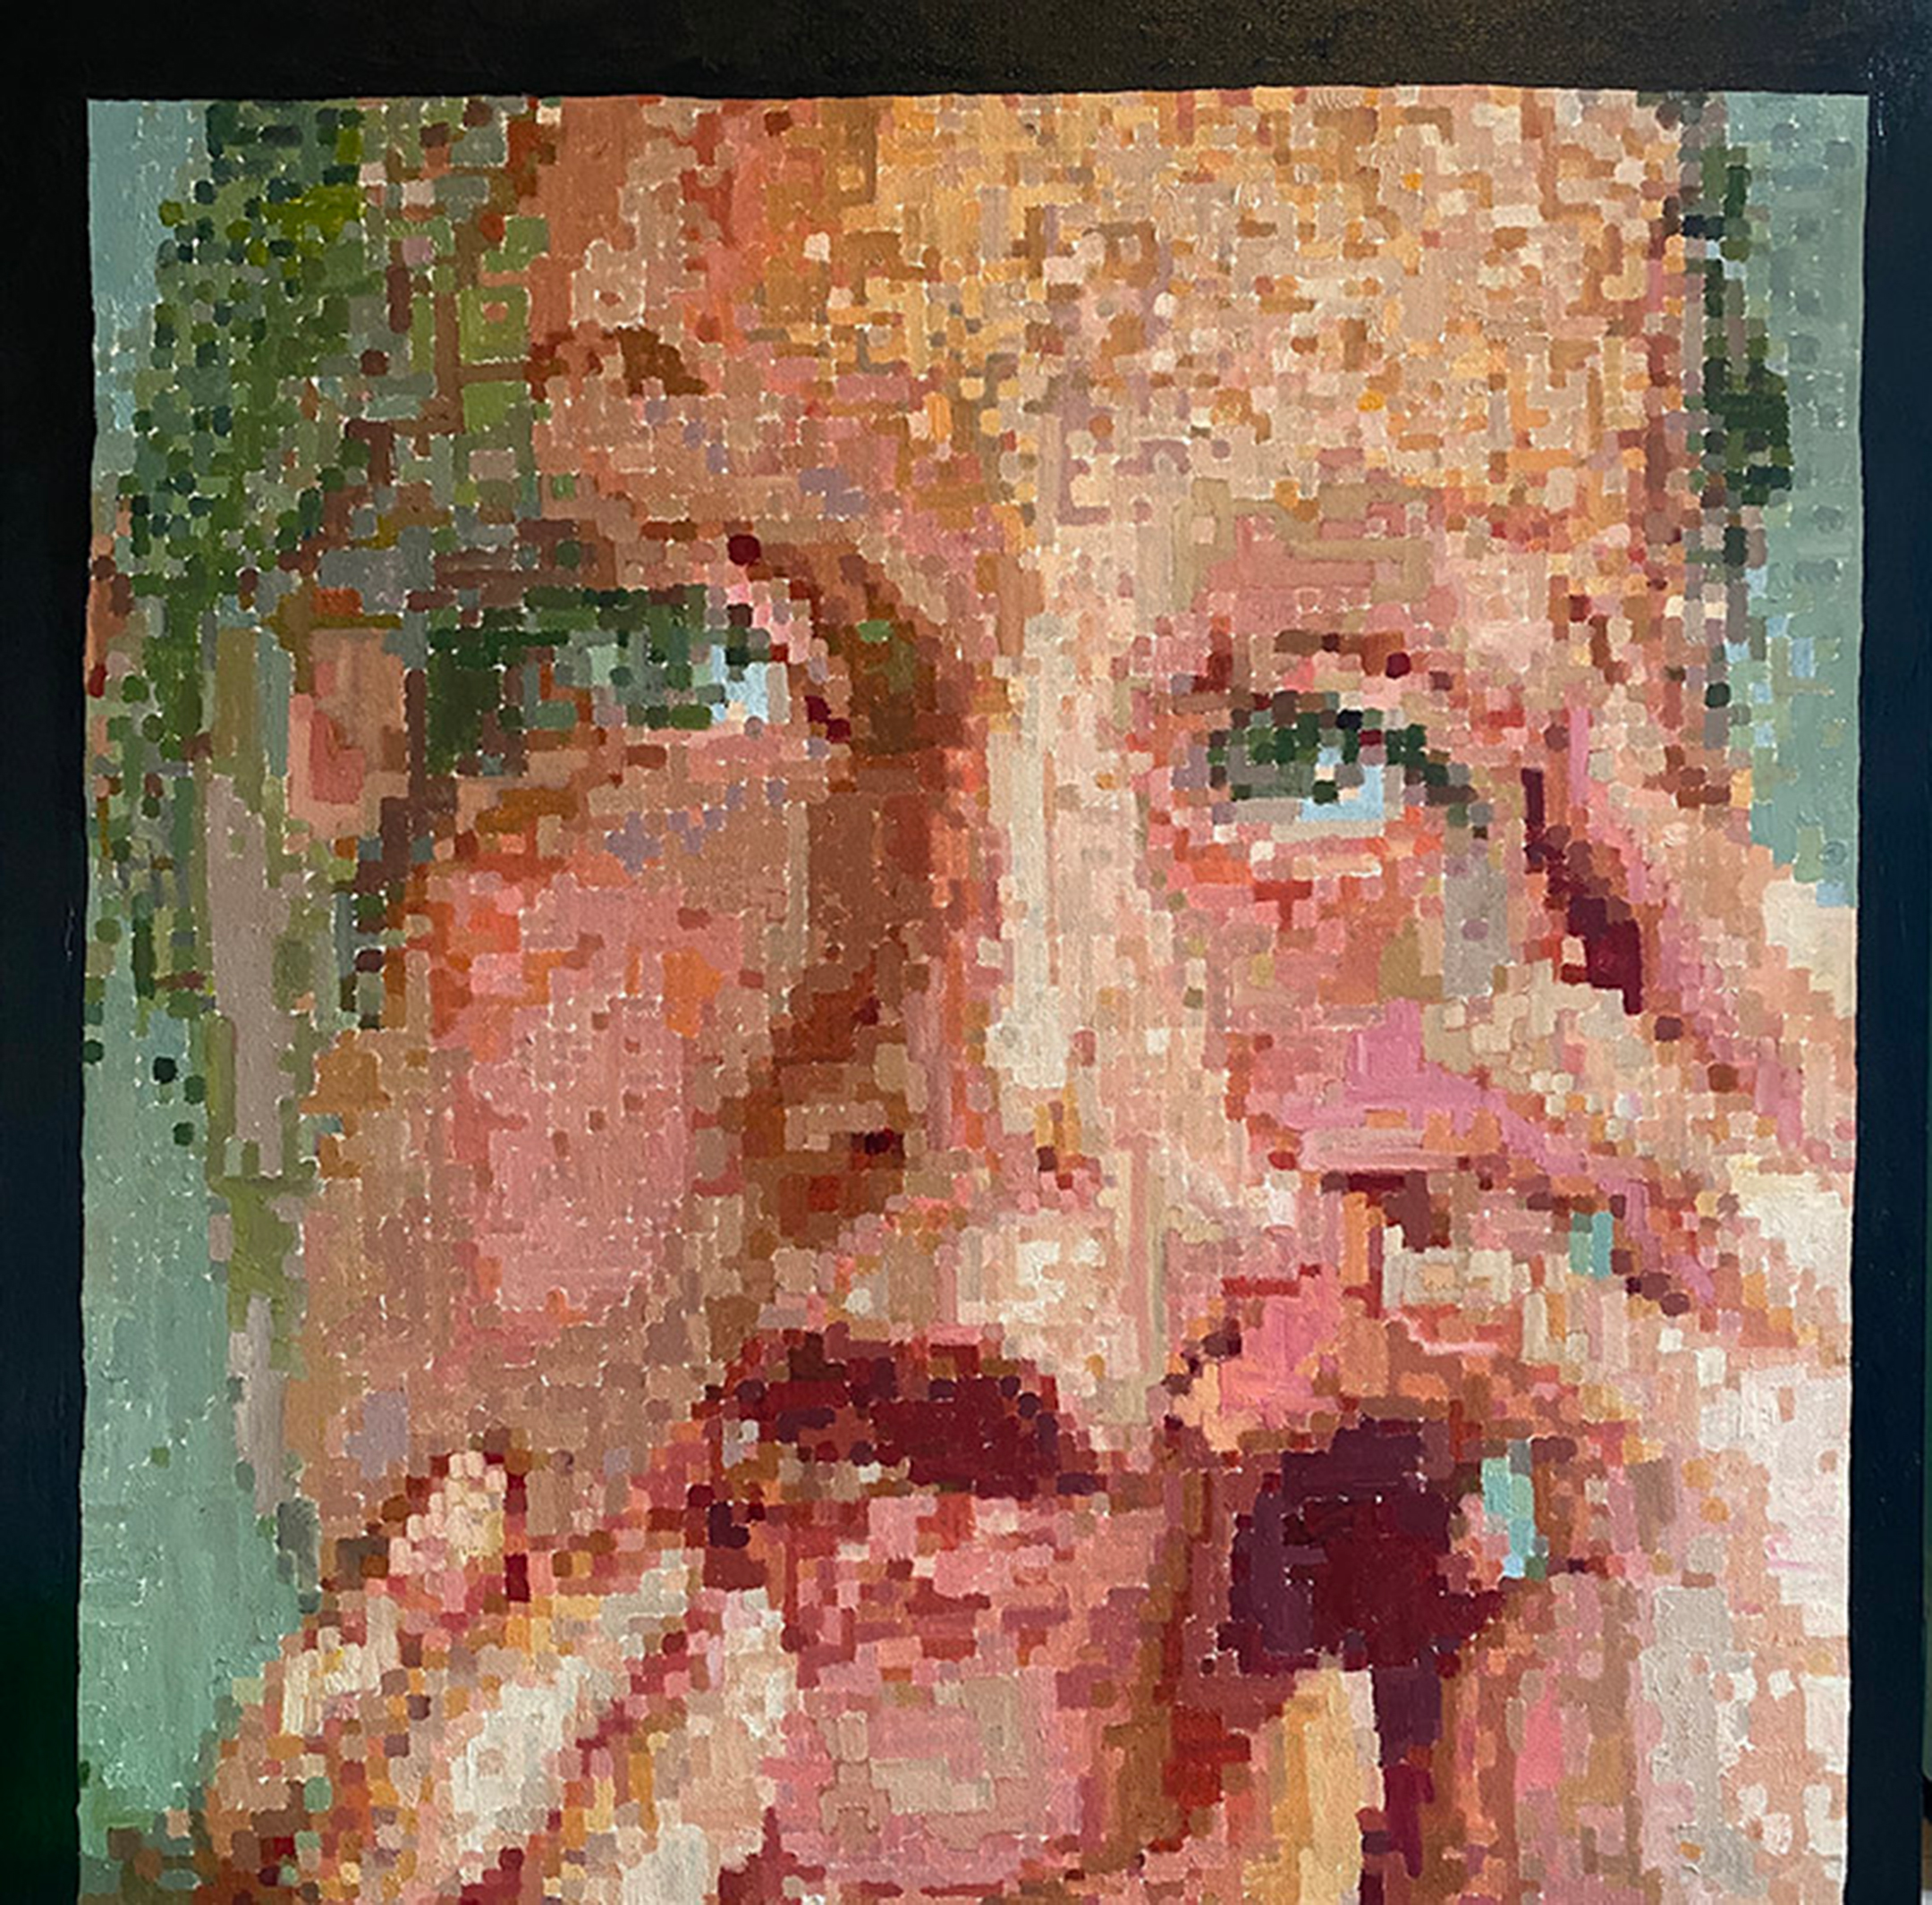 Illustration of a young woman with her hands on her face, created in a way to look blocky and splotchy the closer you are to it